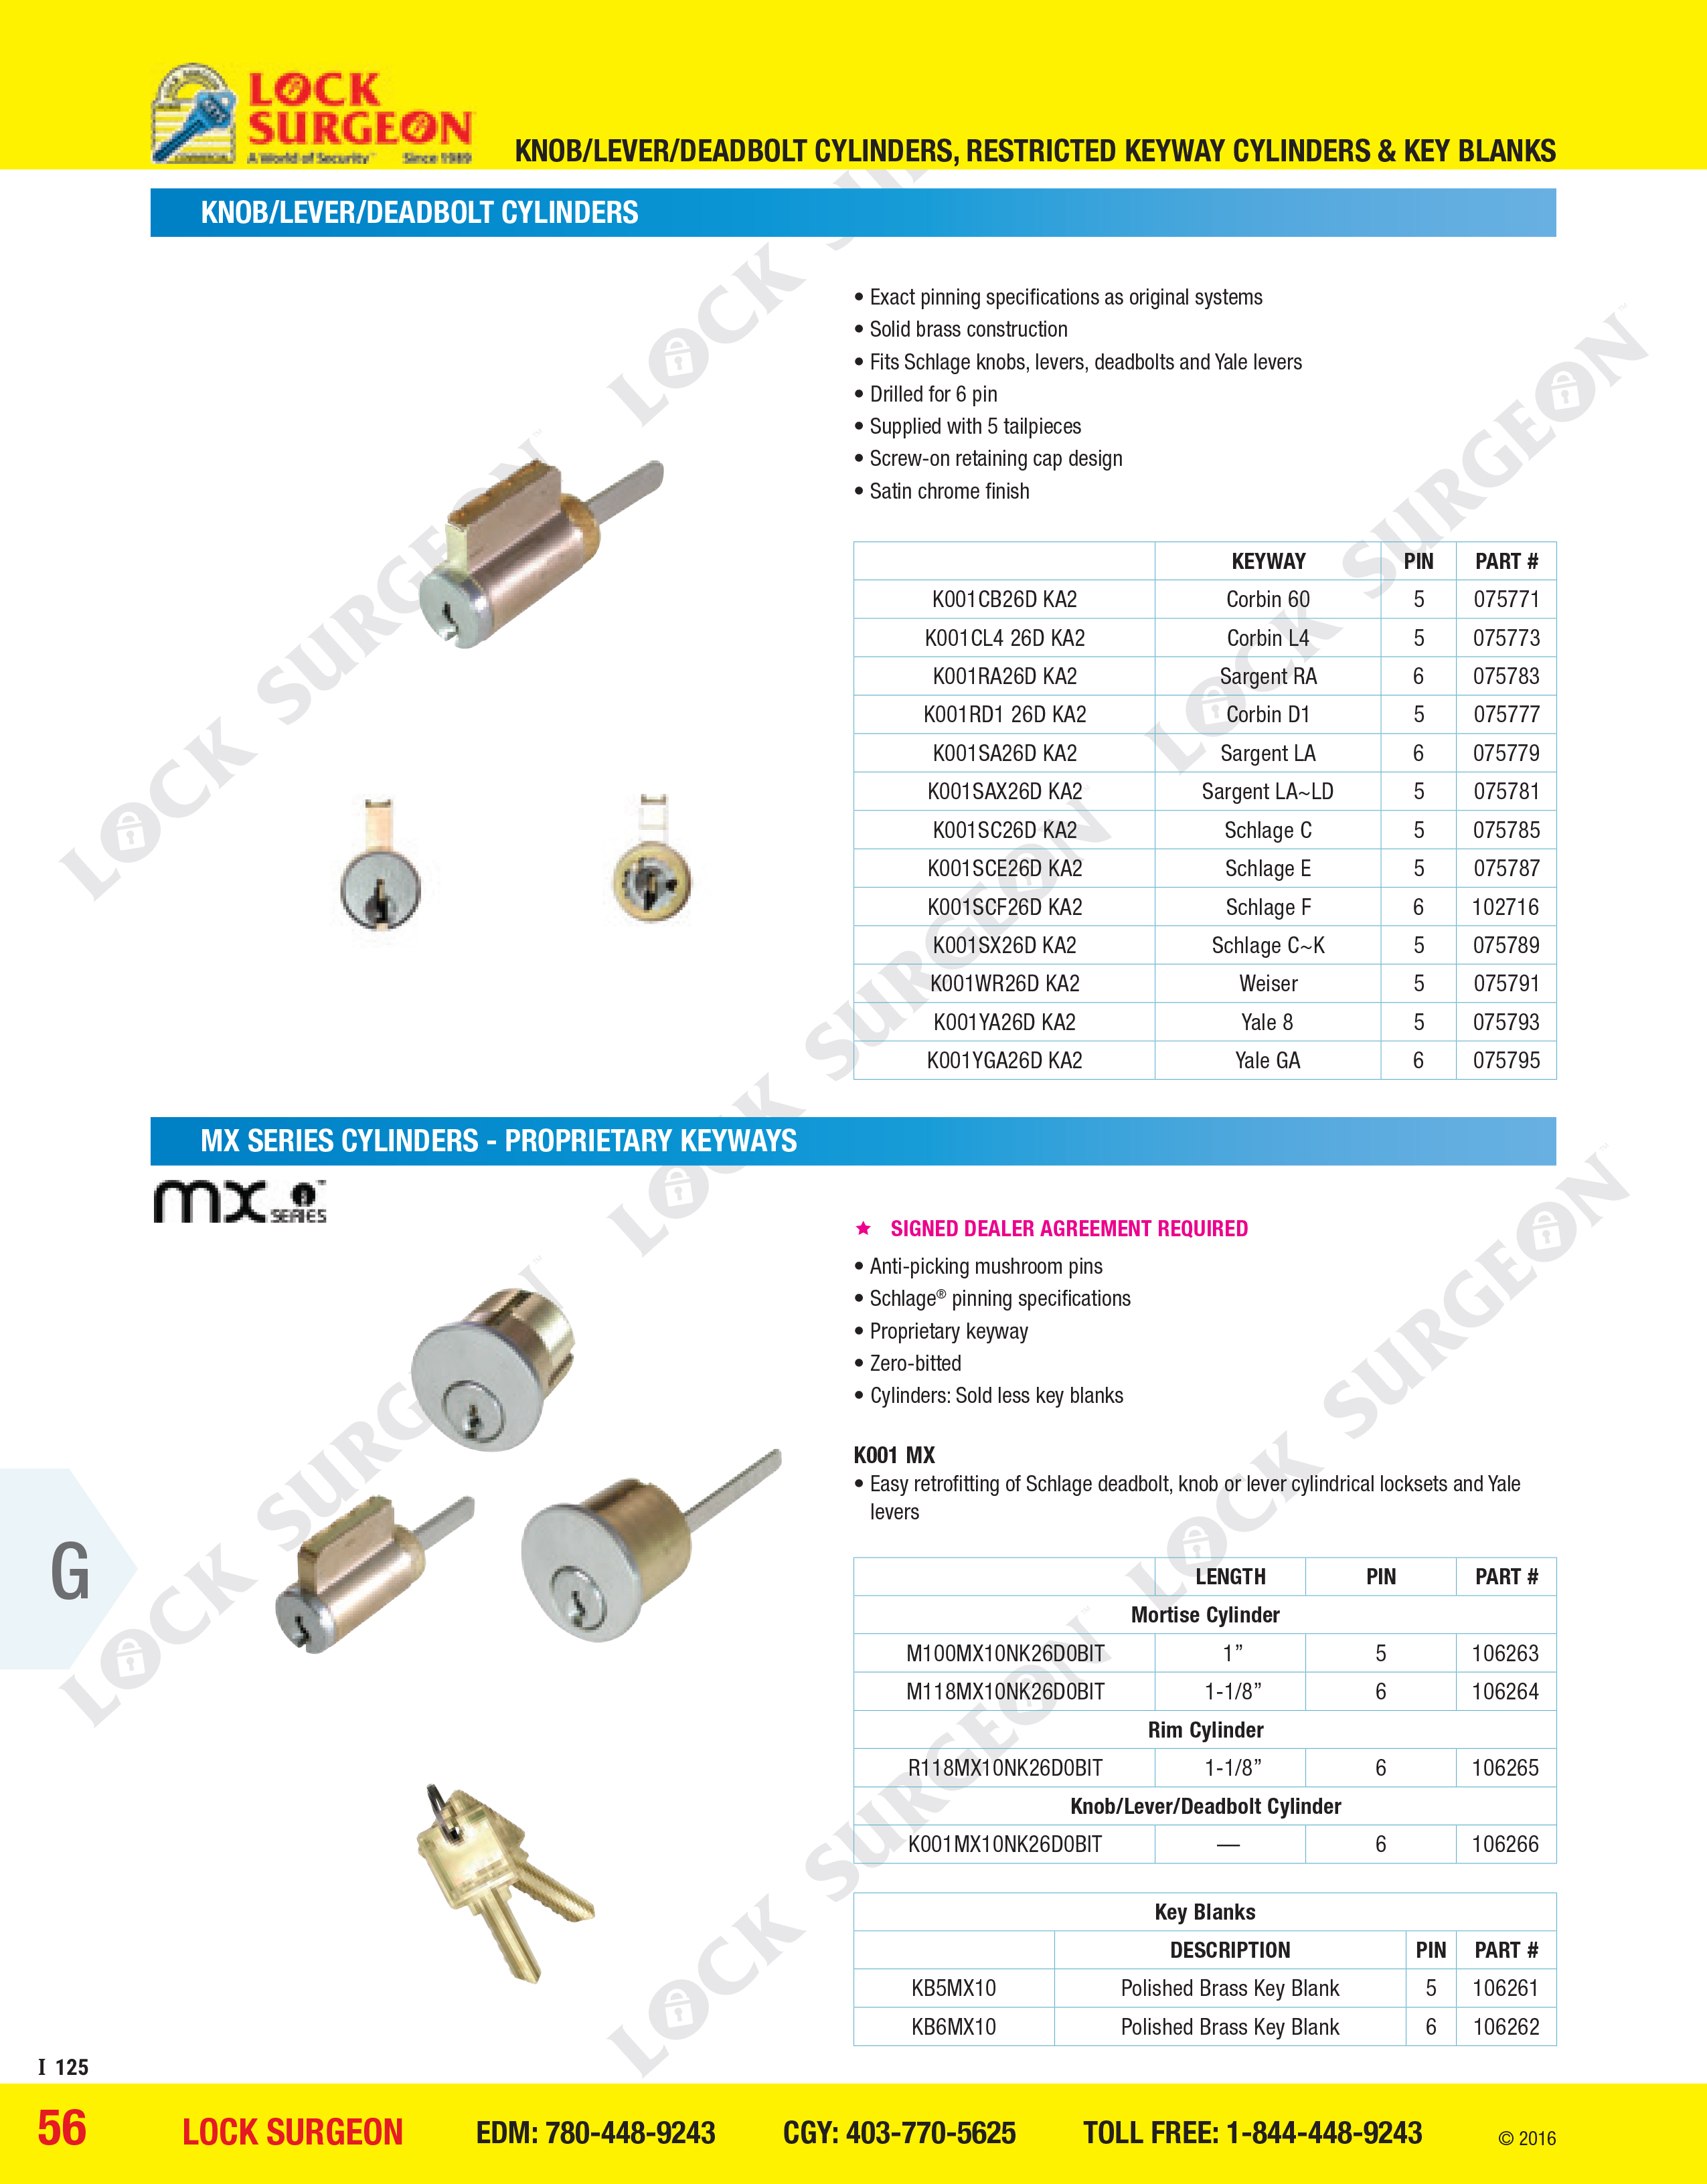 GMS knob lever deadbolt cylinders restricted keyway cylinders and key blanks Calgary.